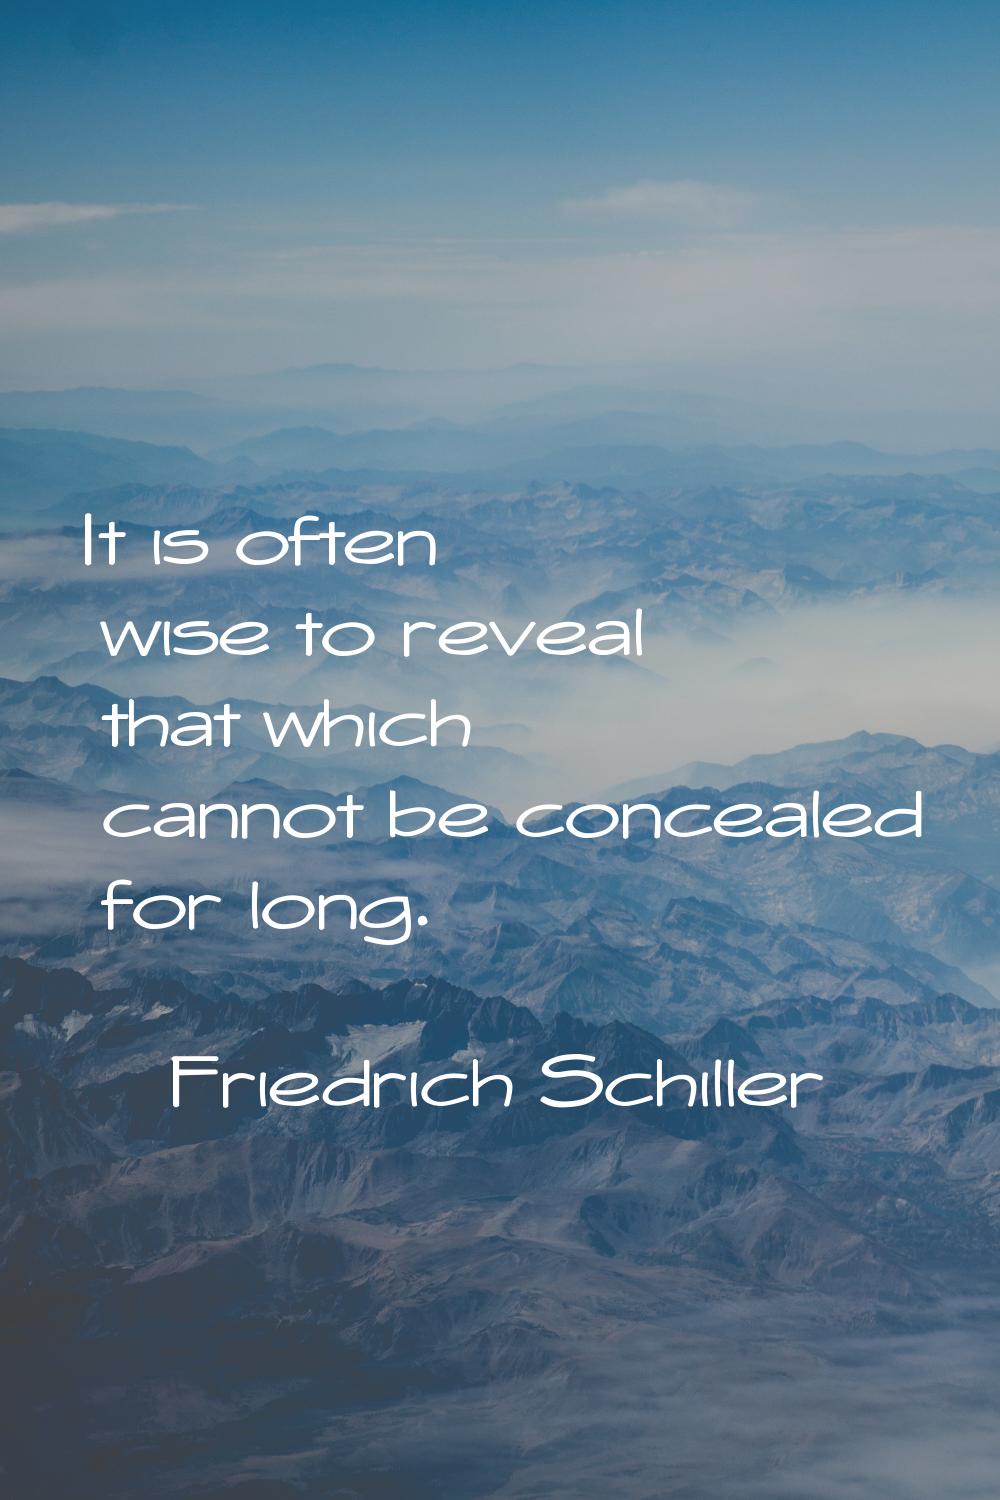 It is often wise to reveal that which cannot be concealed for long.